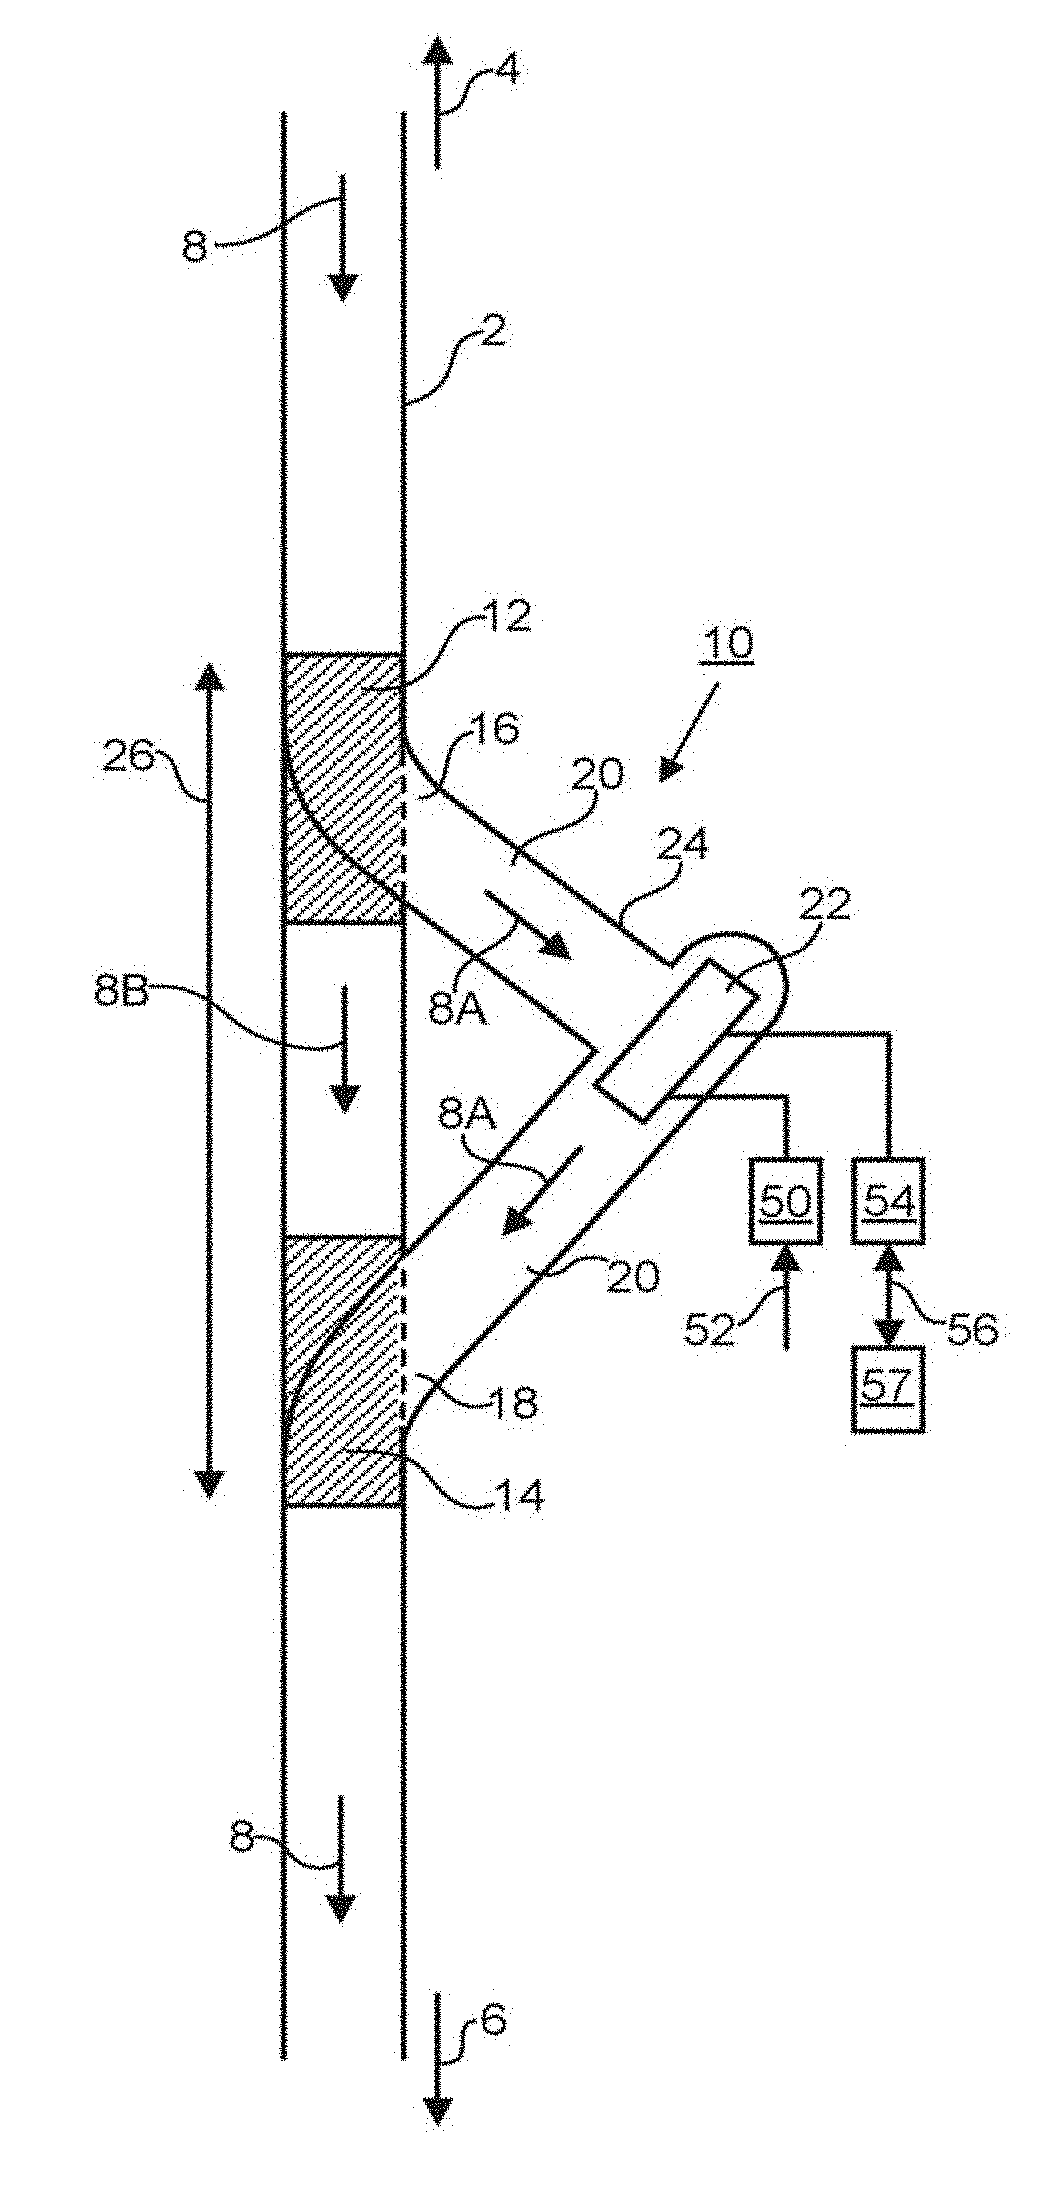 Mechanical circulatory support device with centrifugal impeller designed for implantation in the descending aorta